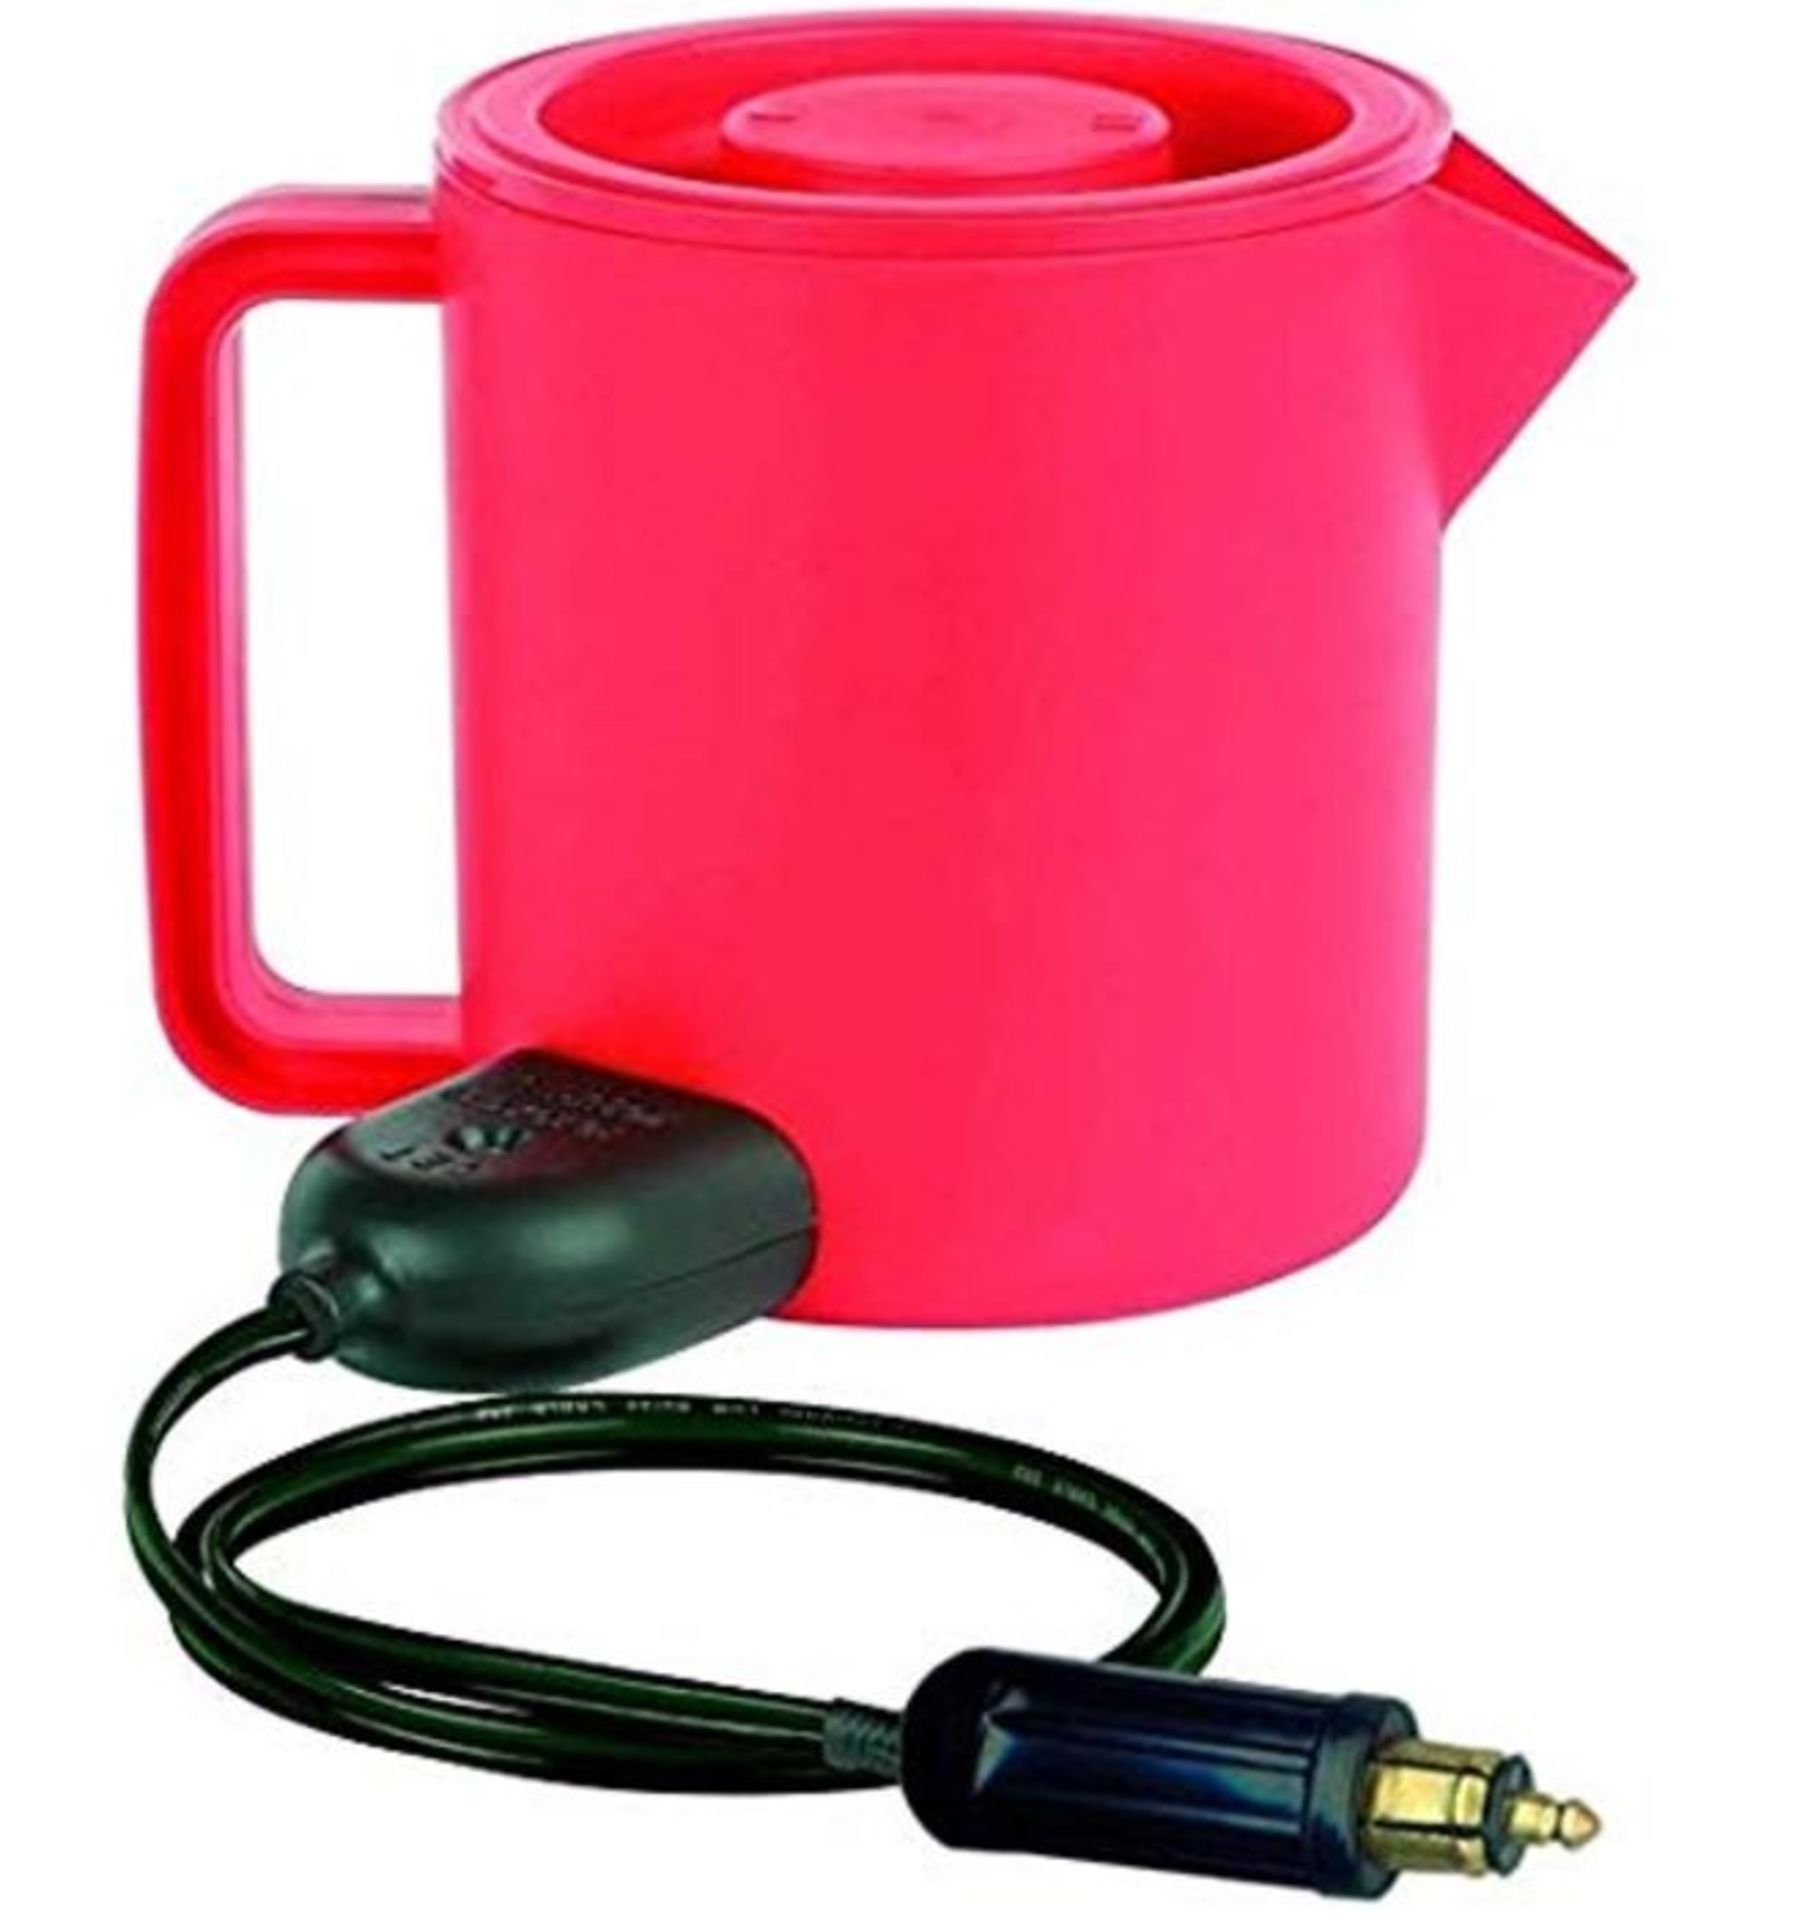 The Classic Big Red 24v MKII Kettle with Hella Plug